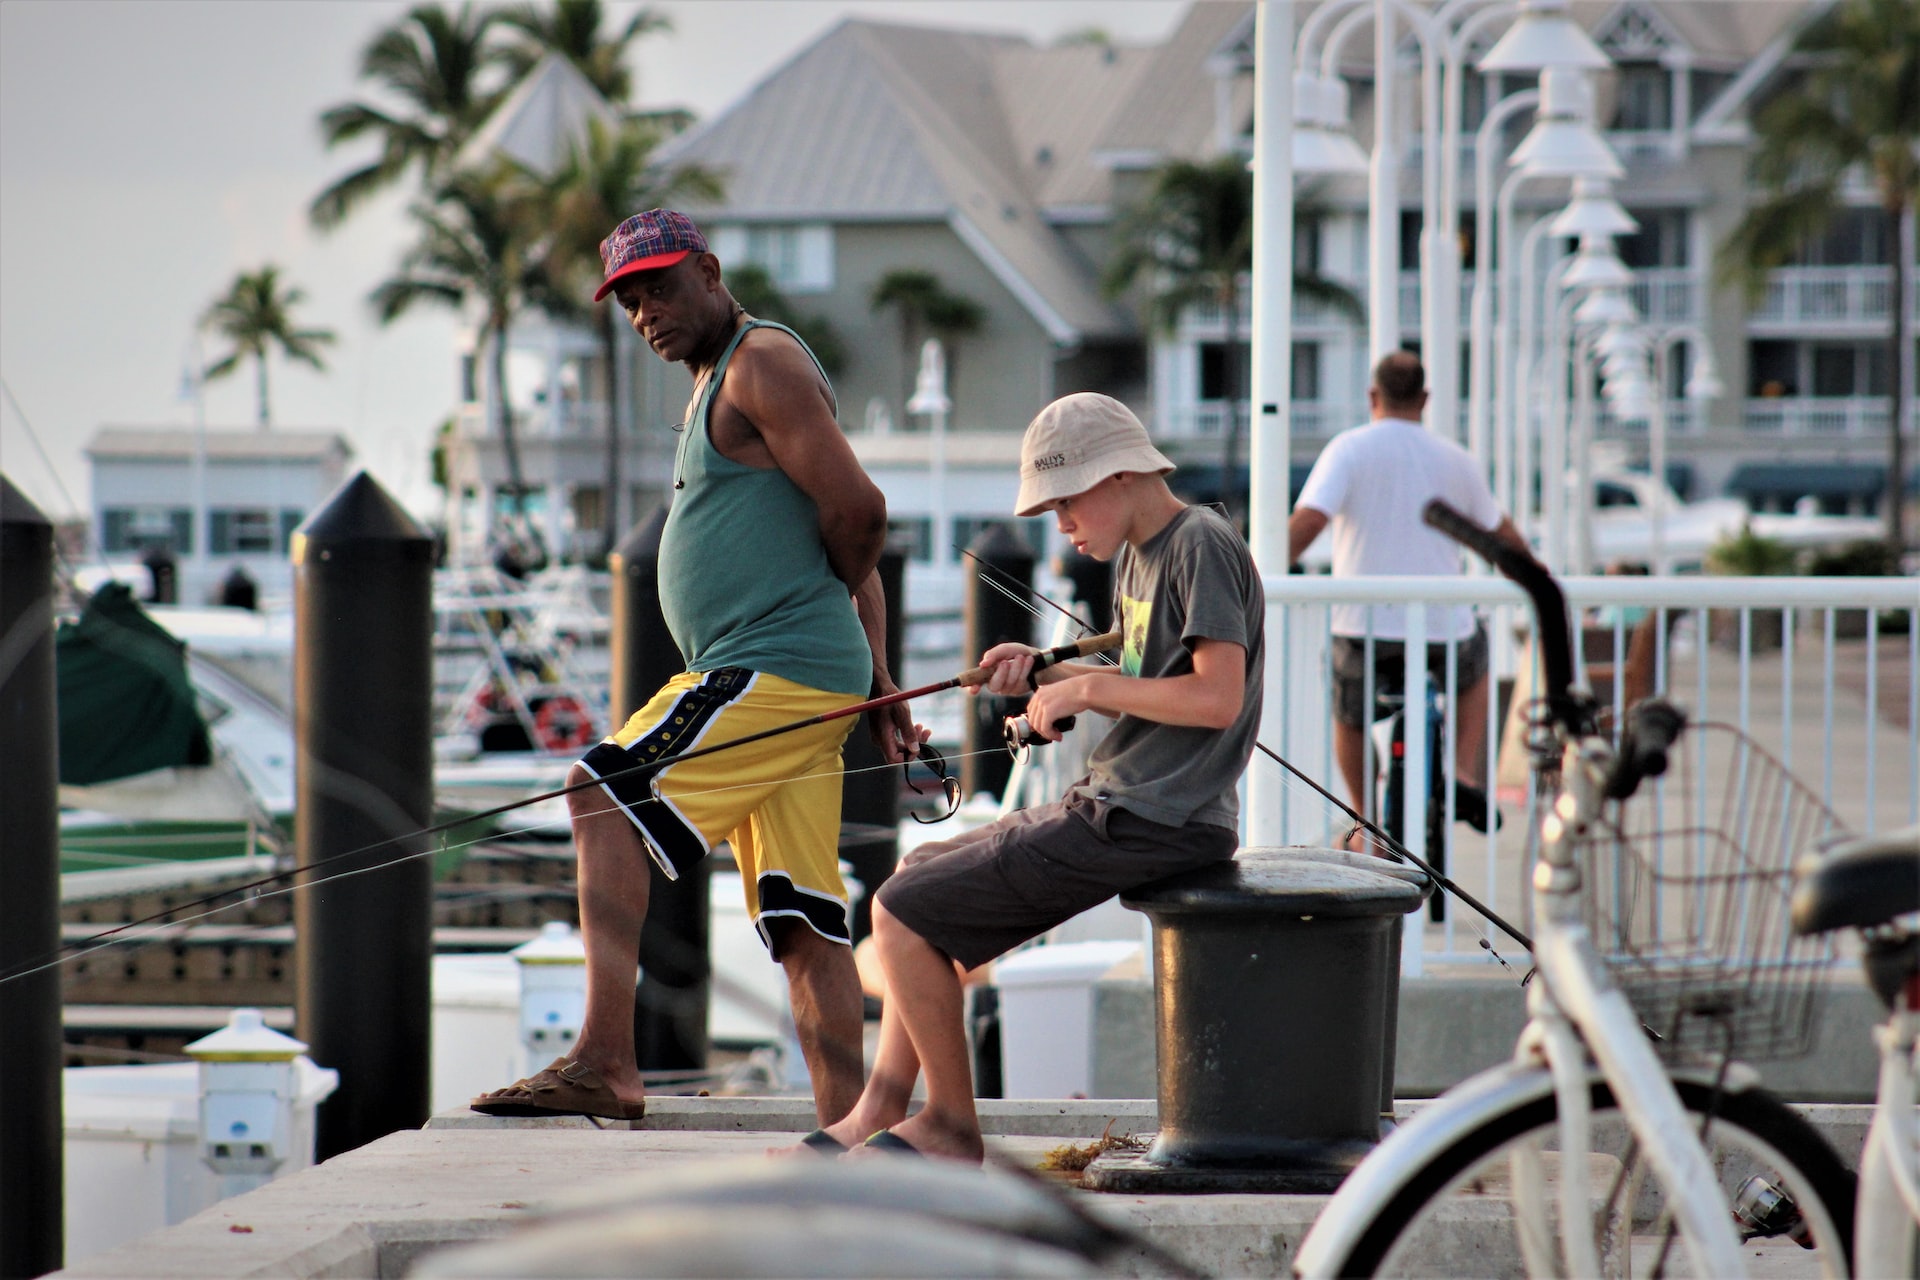 The Best Spots For Shore Fishing In Key West - Key West Fishing Charters